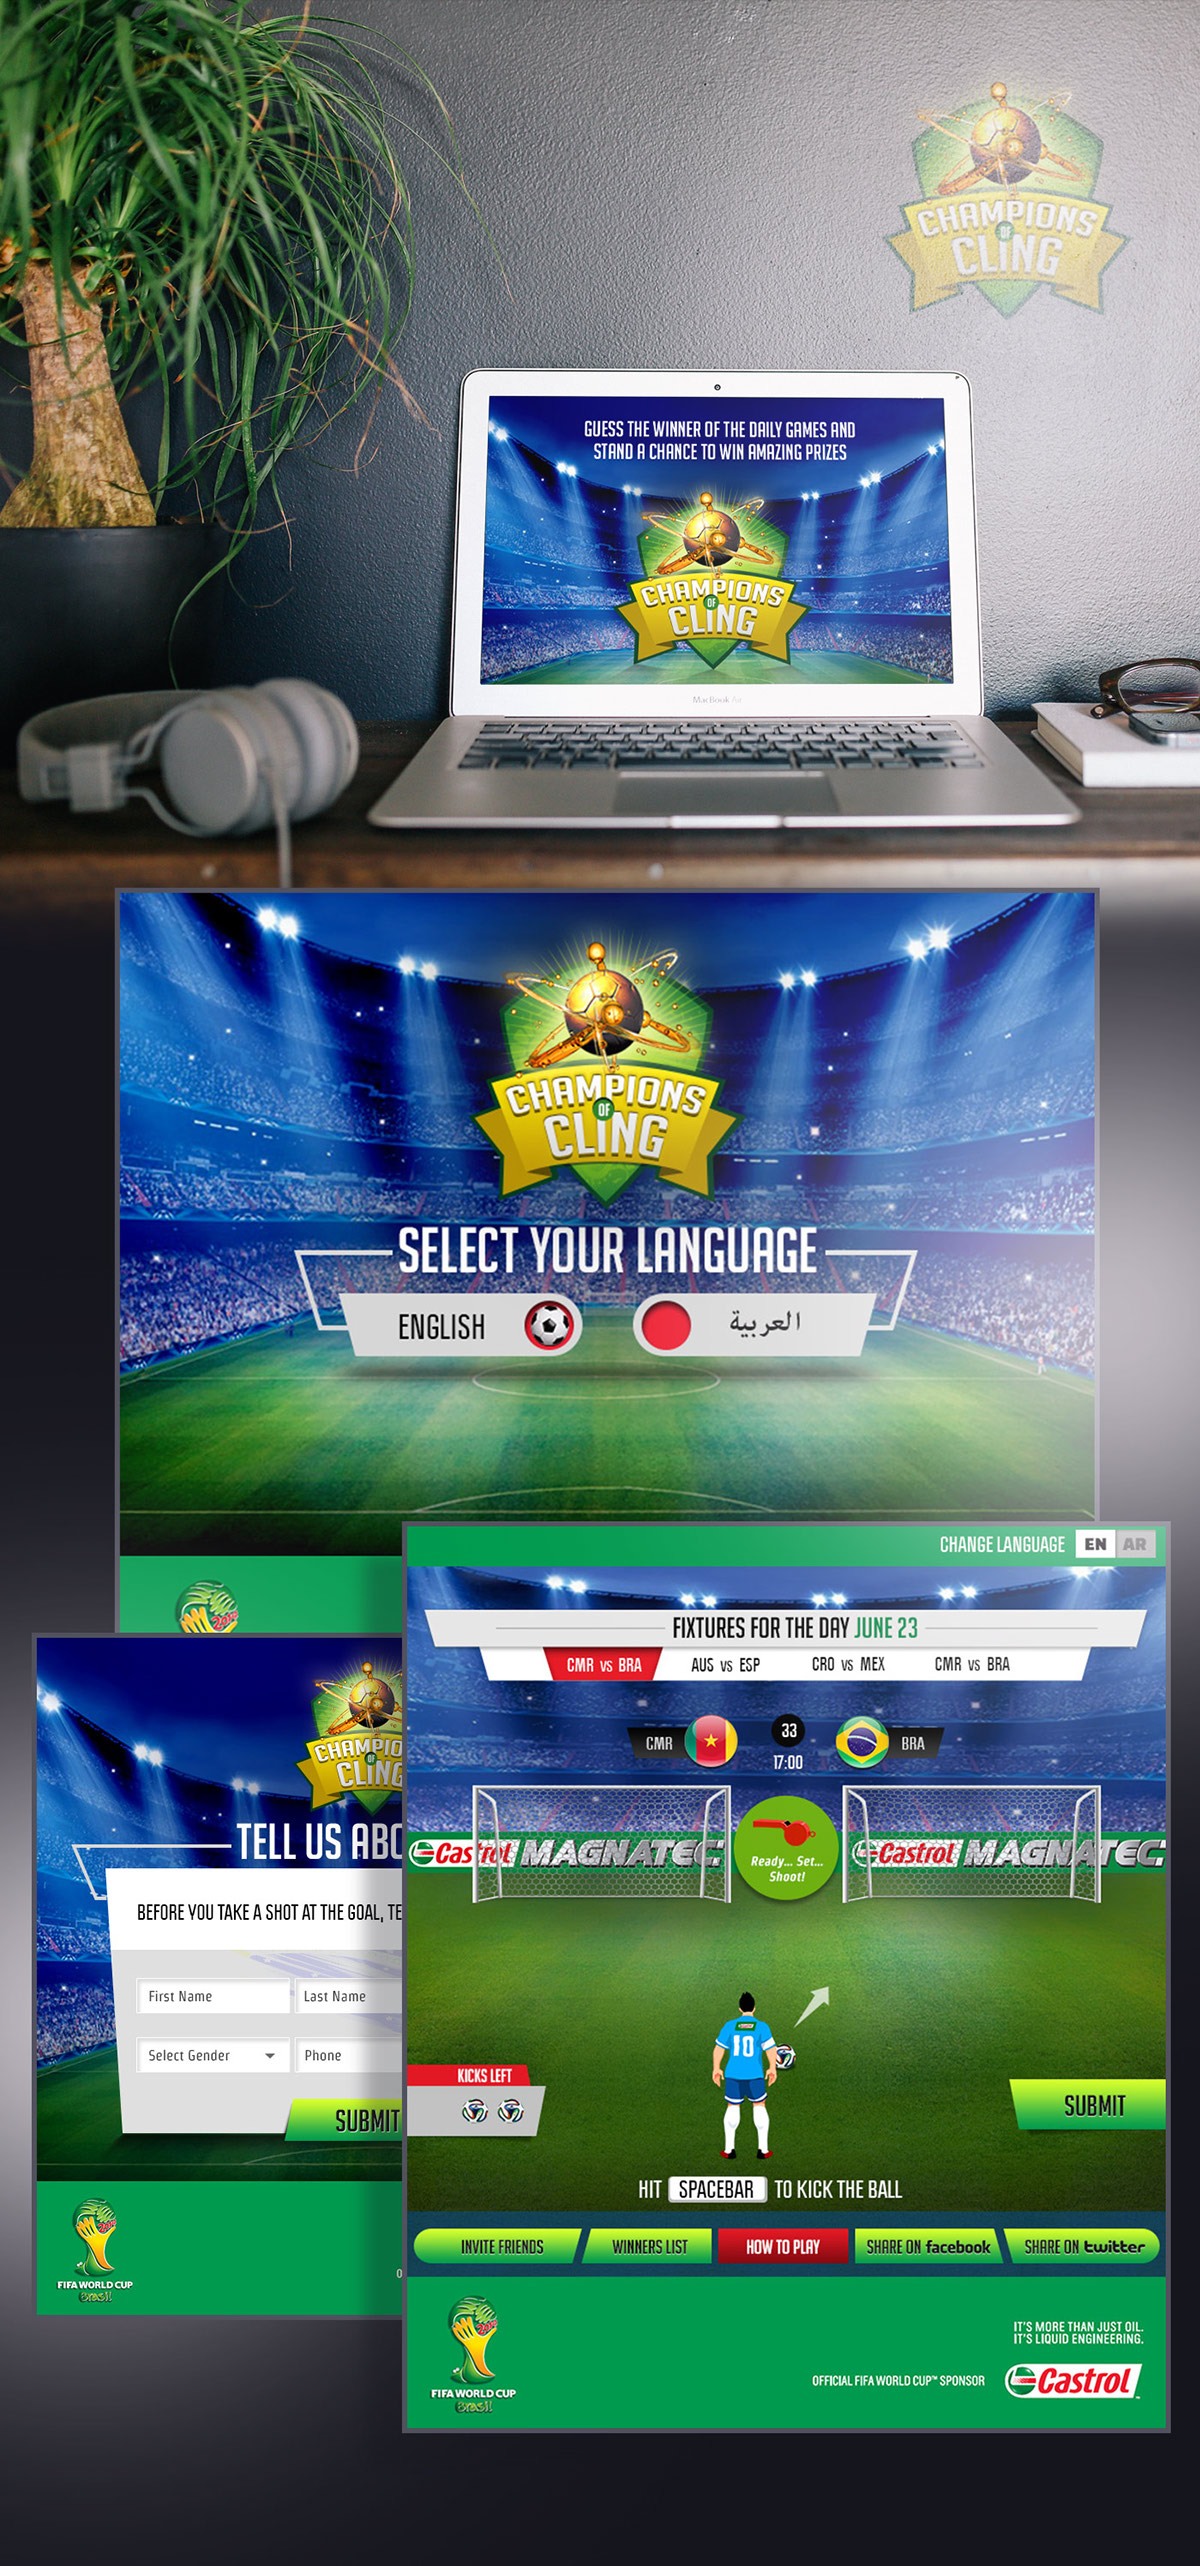 interactive game Castrol Champions cling